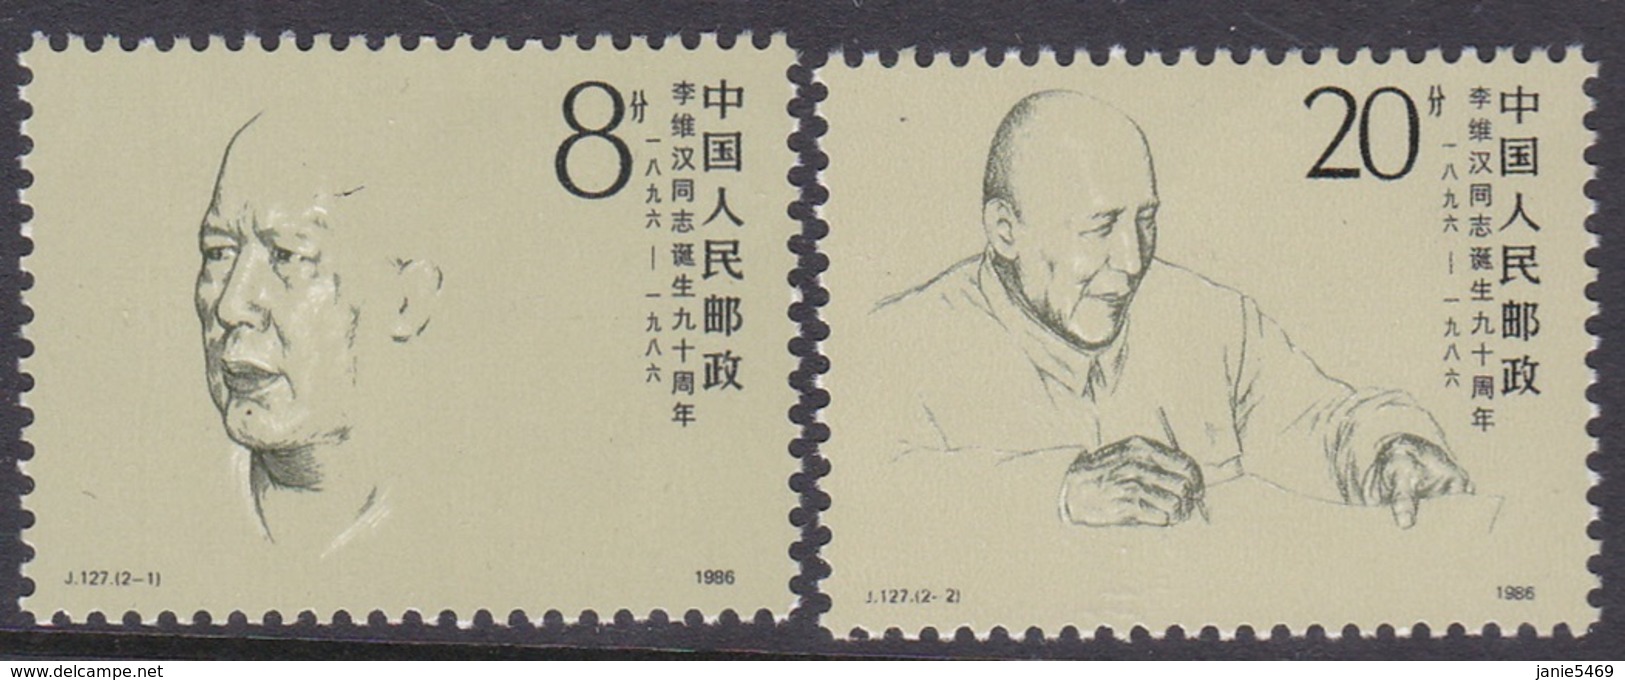 China People's Republic SG 3454-3455 1986 90th Birth Centenary Of Li Weihan, Mint Never Hinged - Unused Stamps